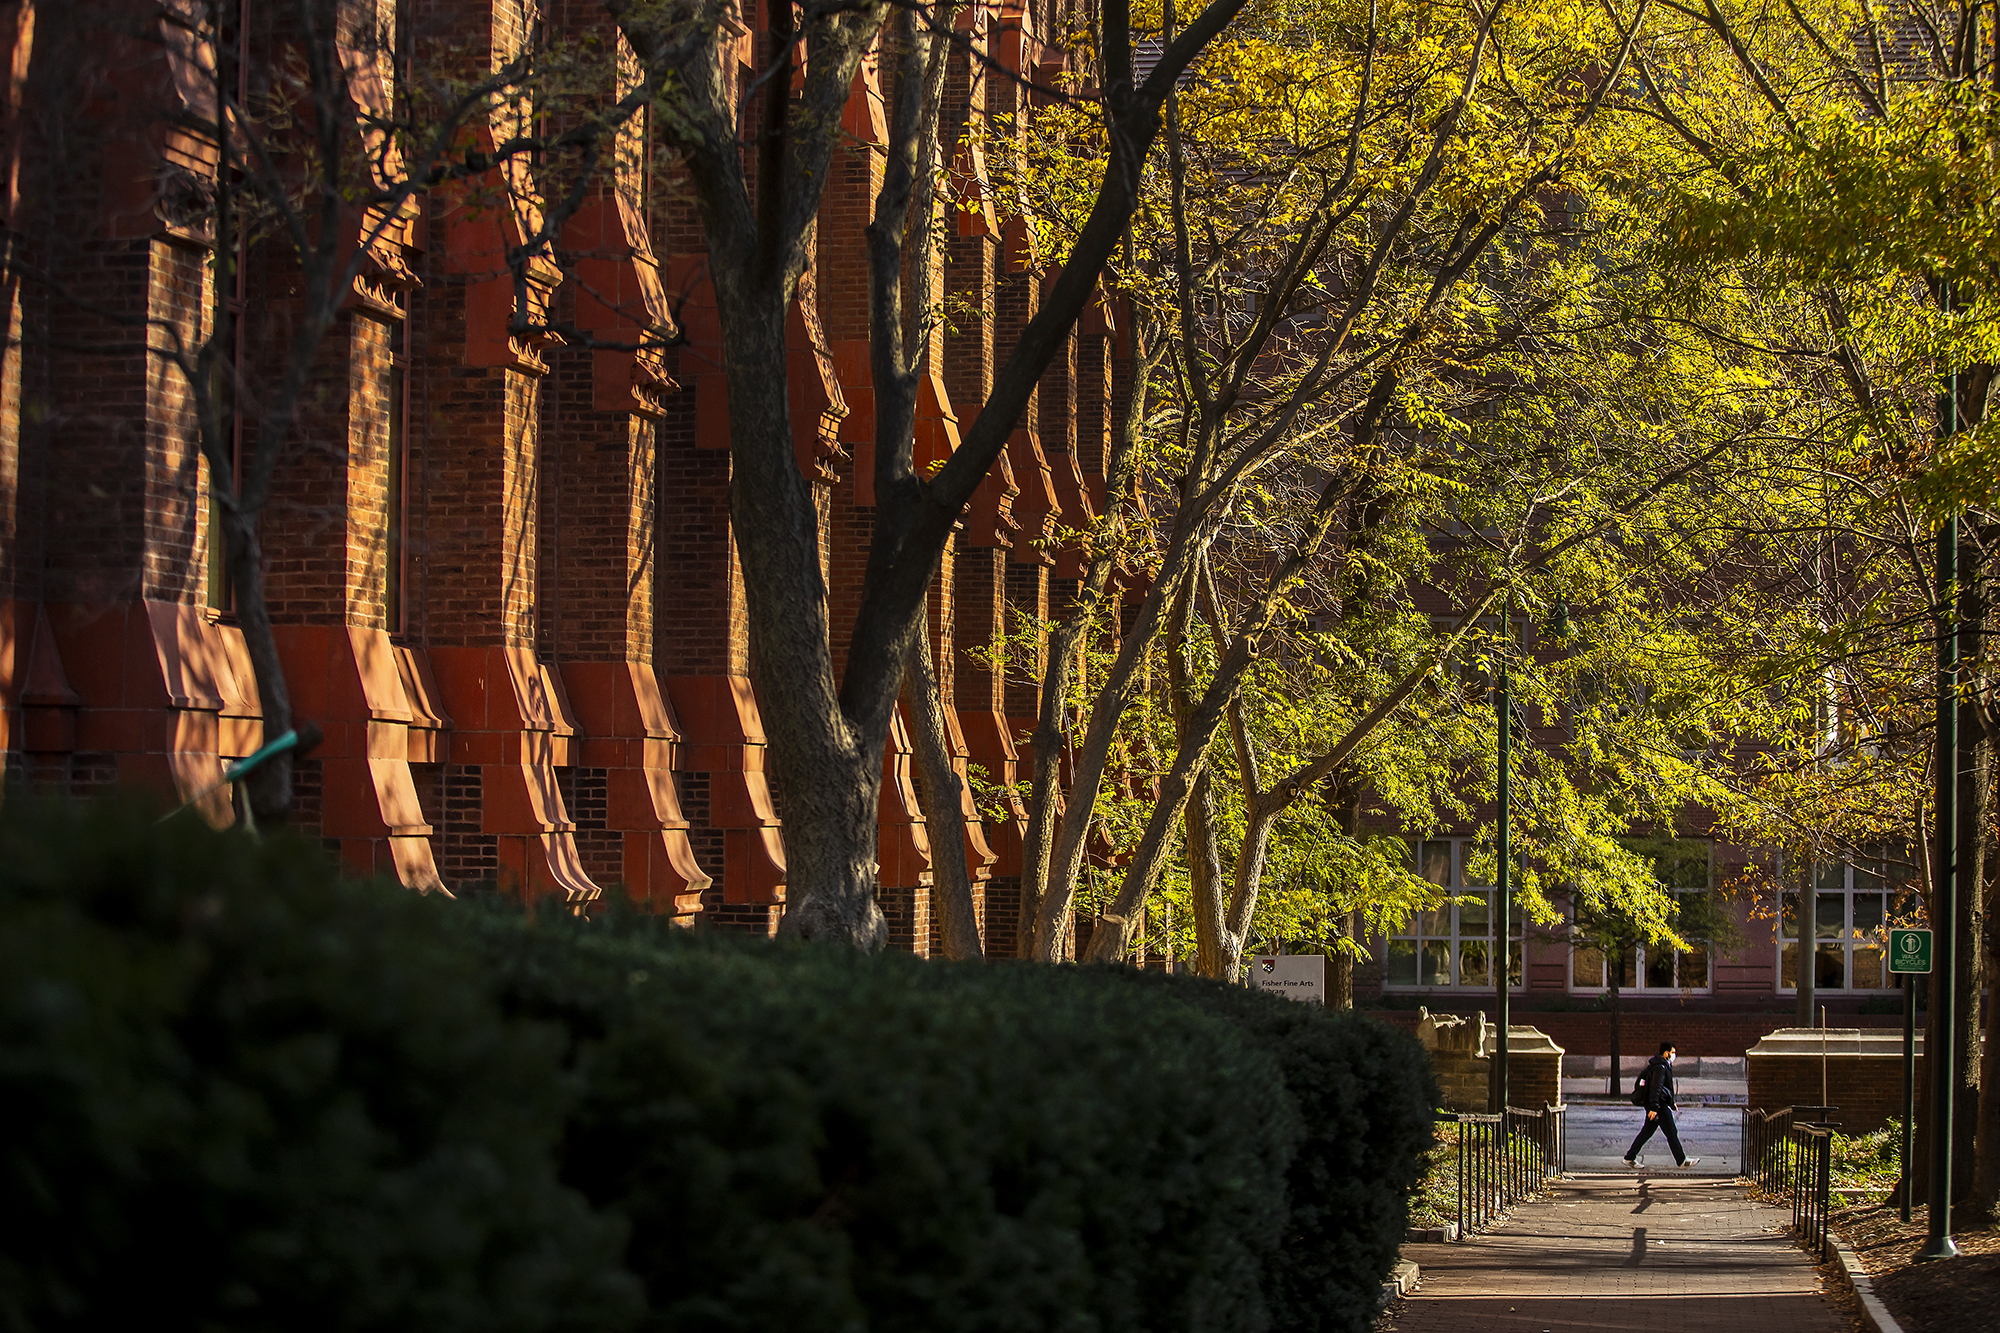 Person walking in distance on Penn’s campus past a building in the autumn sunshine.